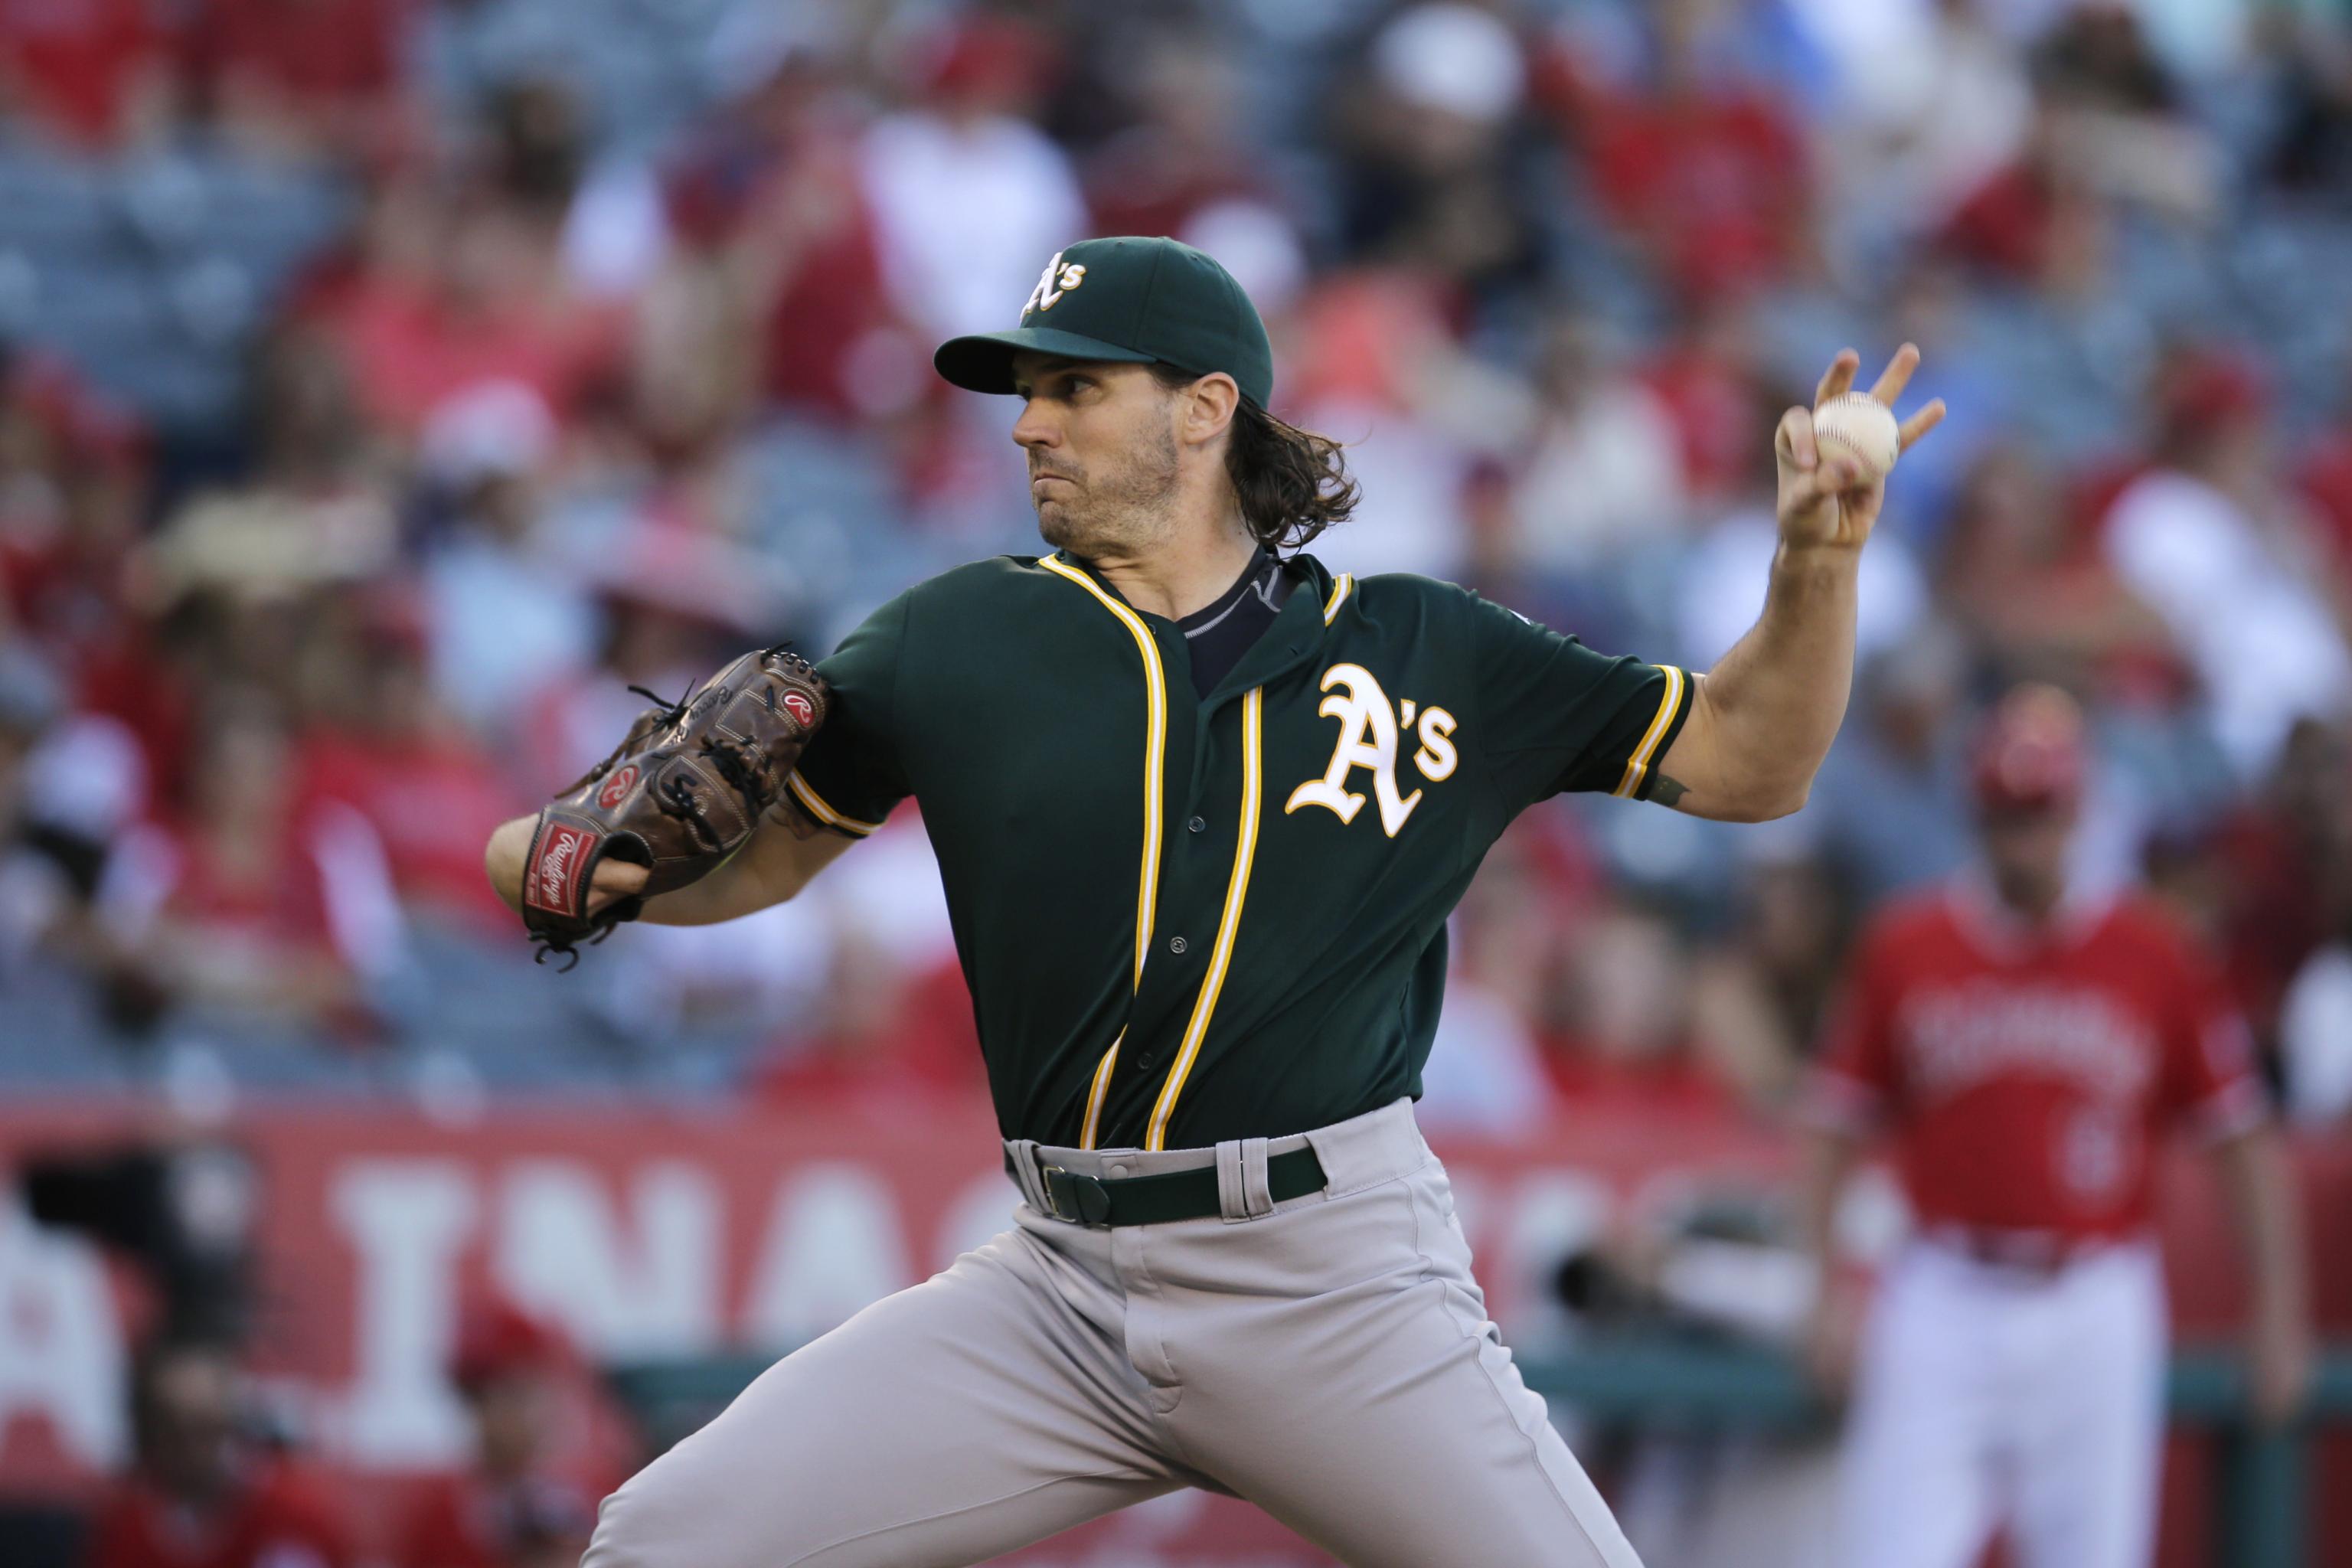 MLB star Barry Zito recounts baseball journey from fame to shame